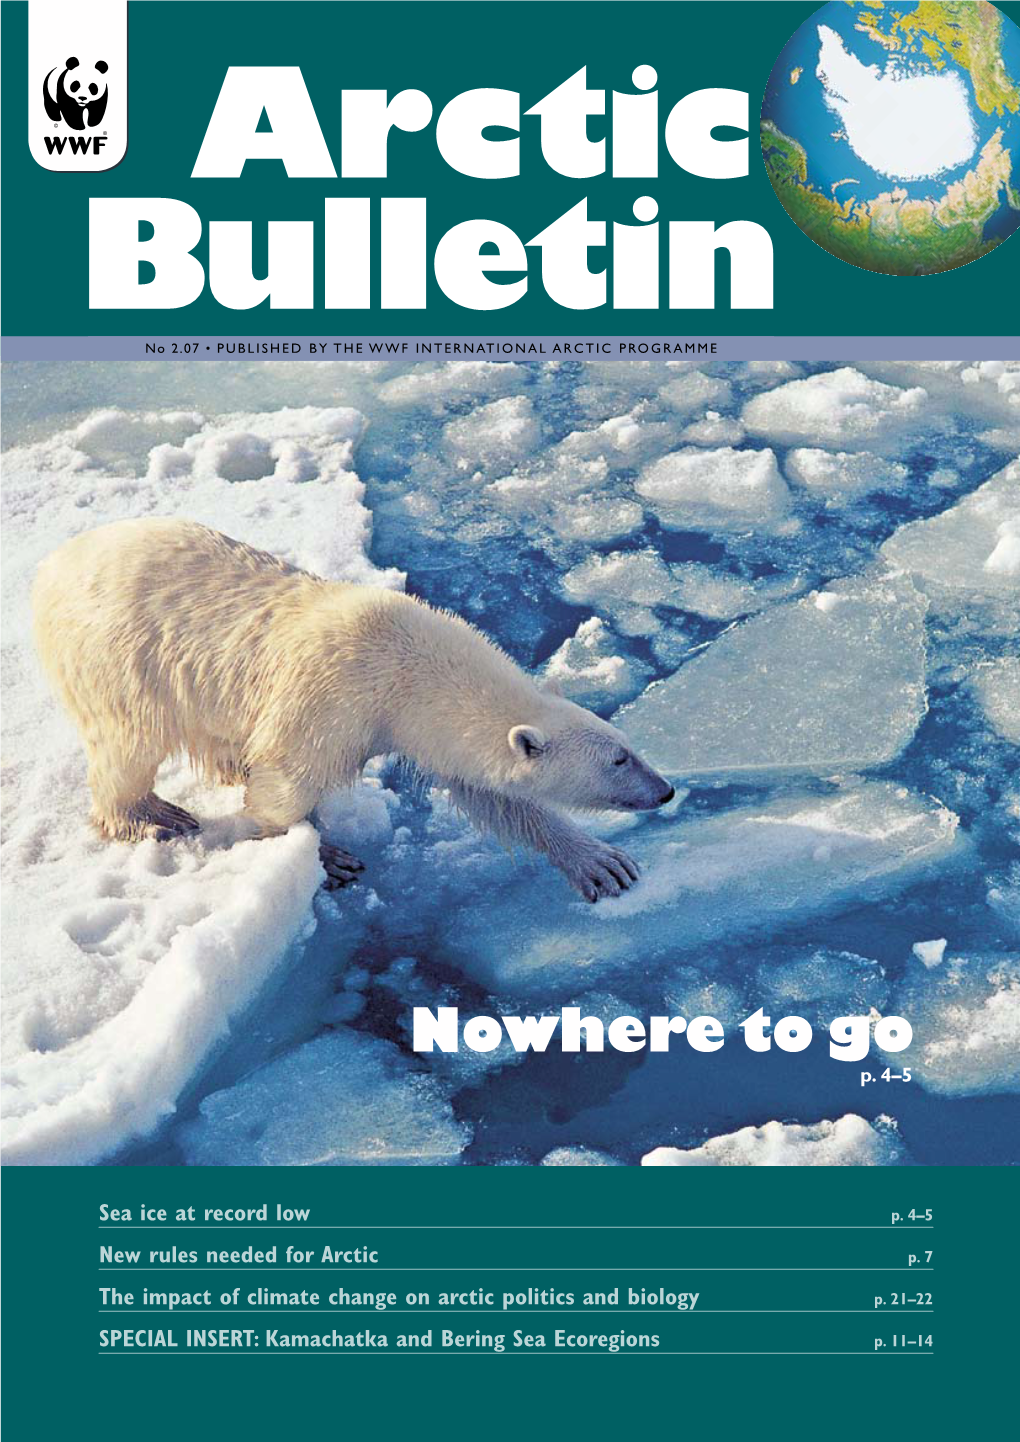 Arctic Bulletin No 2.07 • PUBLISHED by the WWF I Nte R N Ati O N a L a R C T I C P RO G R a MME